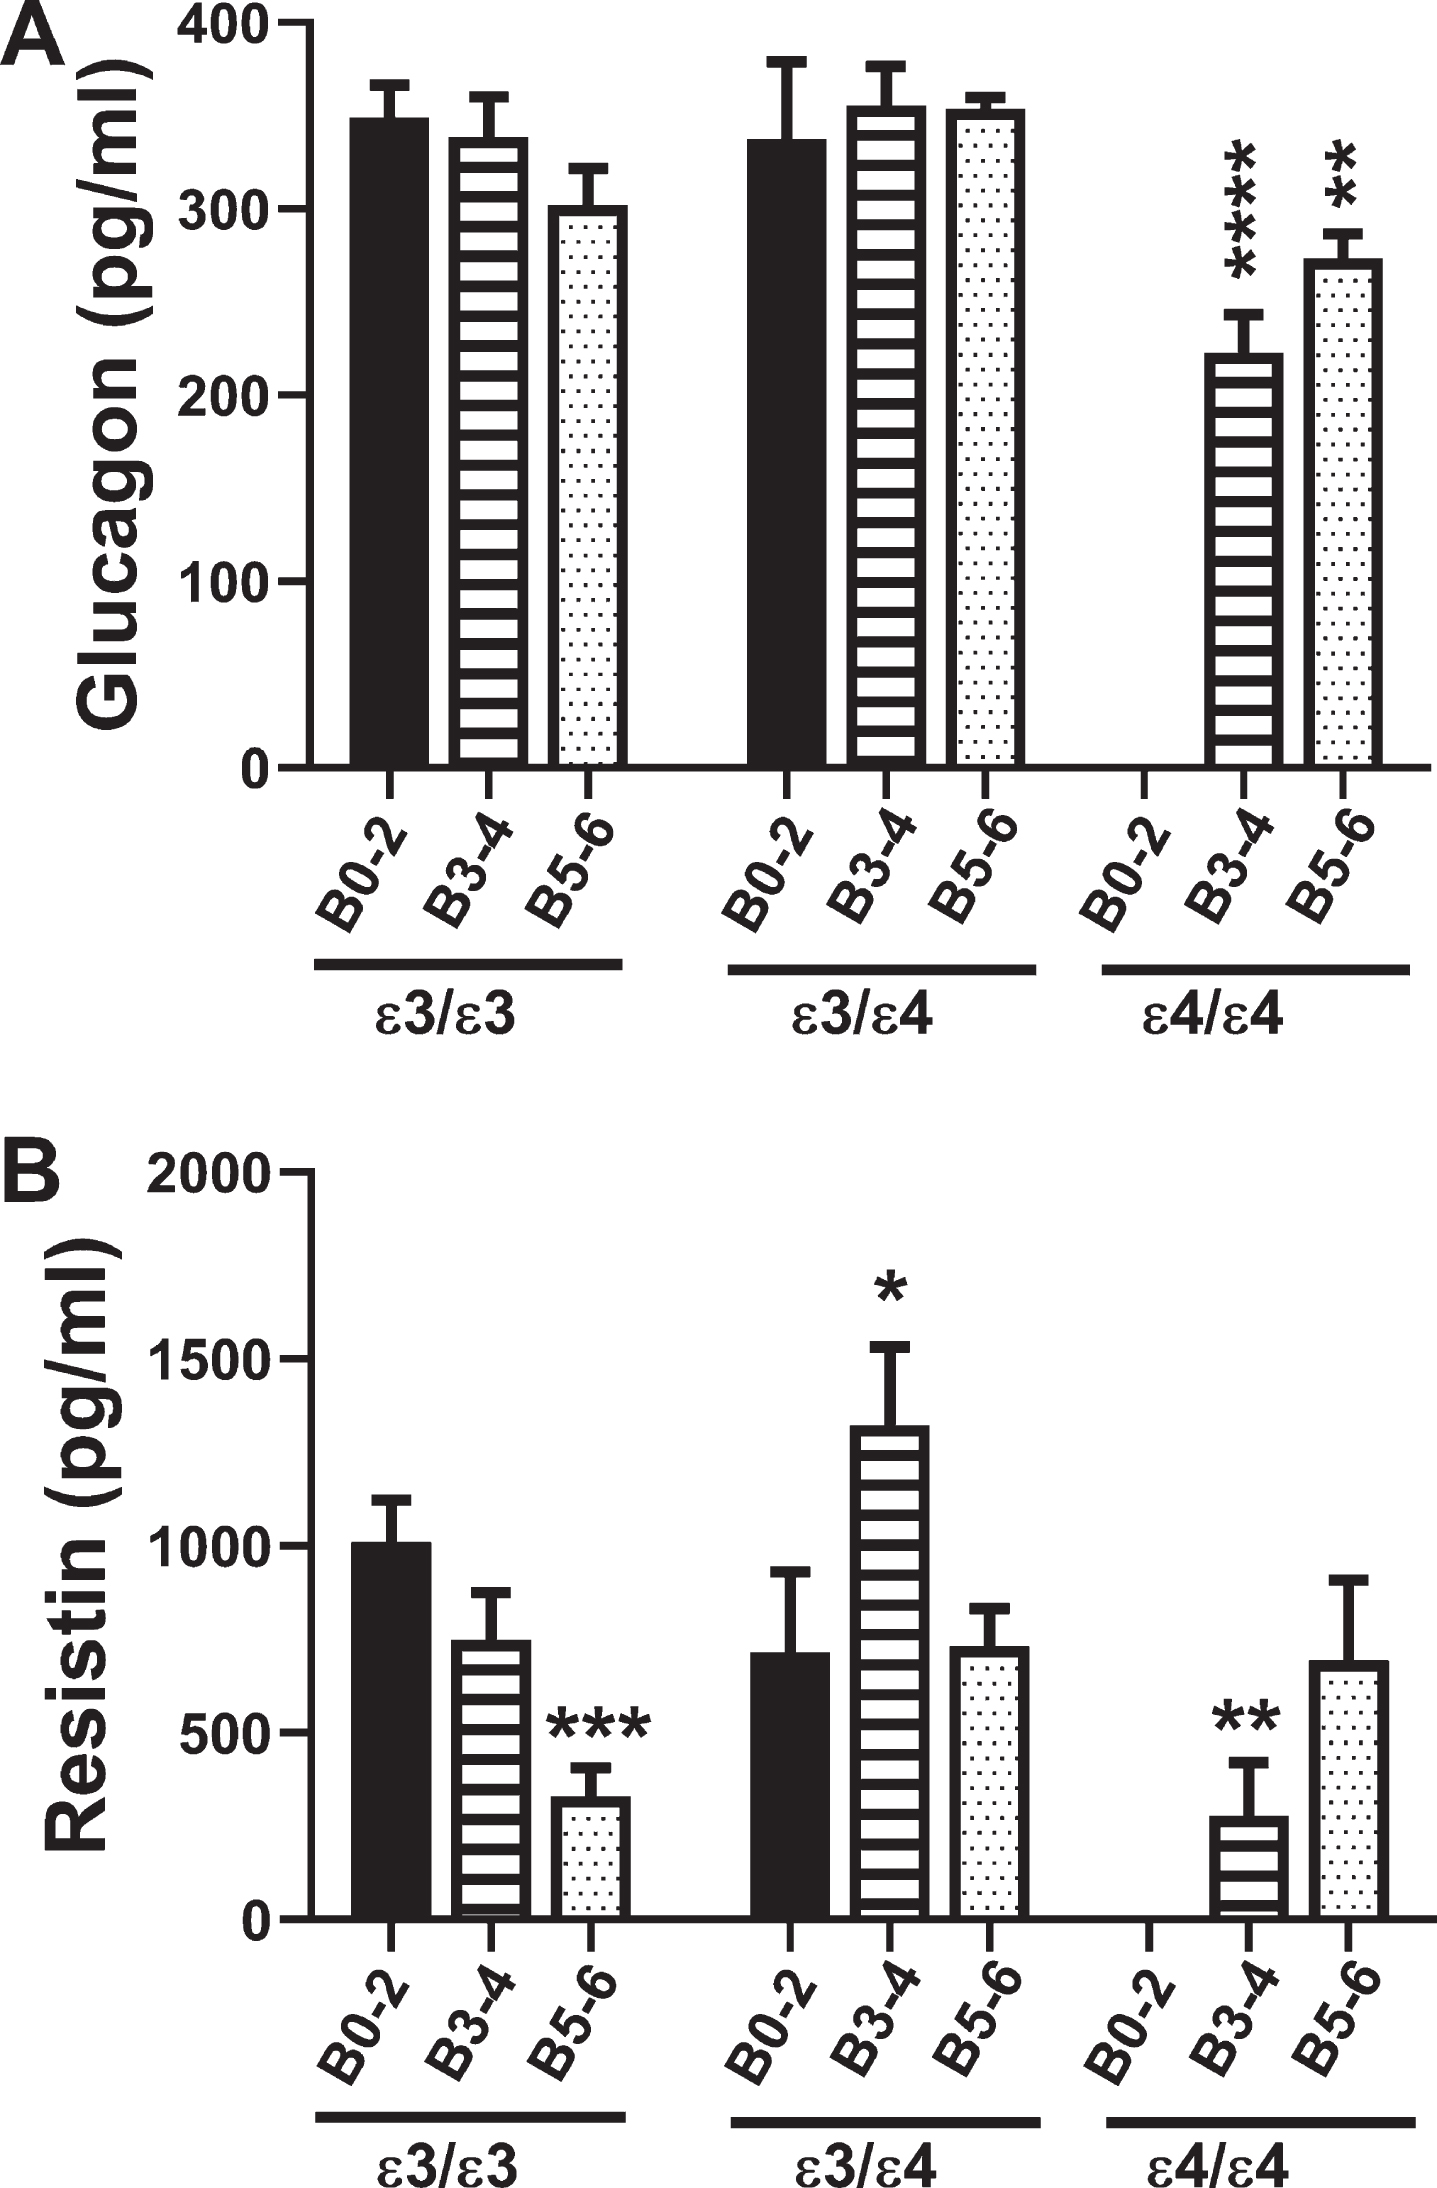 Glucagon and Resistin: A commercial multiplex ELISA was used to measure A) glucagon and B) resistin immunoreactivity in 72 human postmortem frontal cortex tissue samples from patients with known APOE genotypes (APOE ɛ3/ɛ3; APOE ɛ3/ɛ4; APOE ɛ4/ɛ4). Standardized formalin fixed paraffin-embedded histological sections were used to assign Braak stage (B) severities of AD: B0–2 represents normal aging; B3–4 represents moderate AD; B5–6 is severe AD. The graphs depict the mean±S.E.M. levels (pg/mL) of immunoreactivity. Two-way ANOVA with post-hoc Tukey multiple comparison tests were used for intergroup comparisons. *p < 0.05; **p < 0.01; ***p < 0.005; ****p < 0.0001 relative to B0–2 APOE ɛ3/ɛ3 controls. Other significant inter-group differences are provided in Tables 9 and 10.